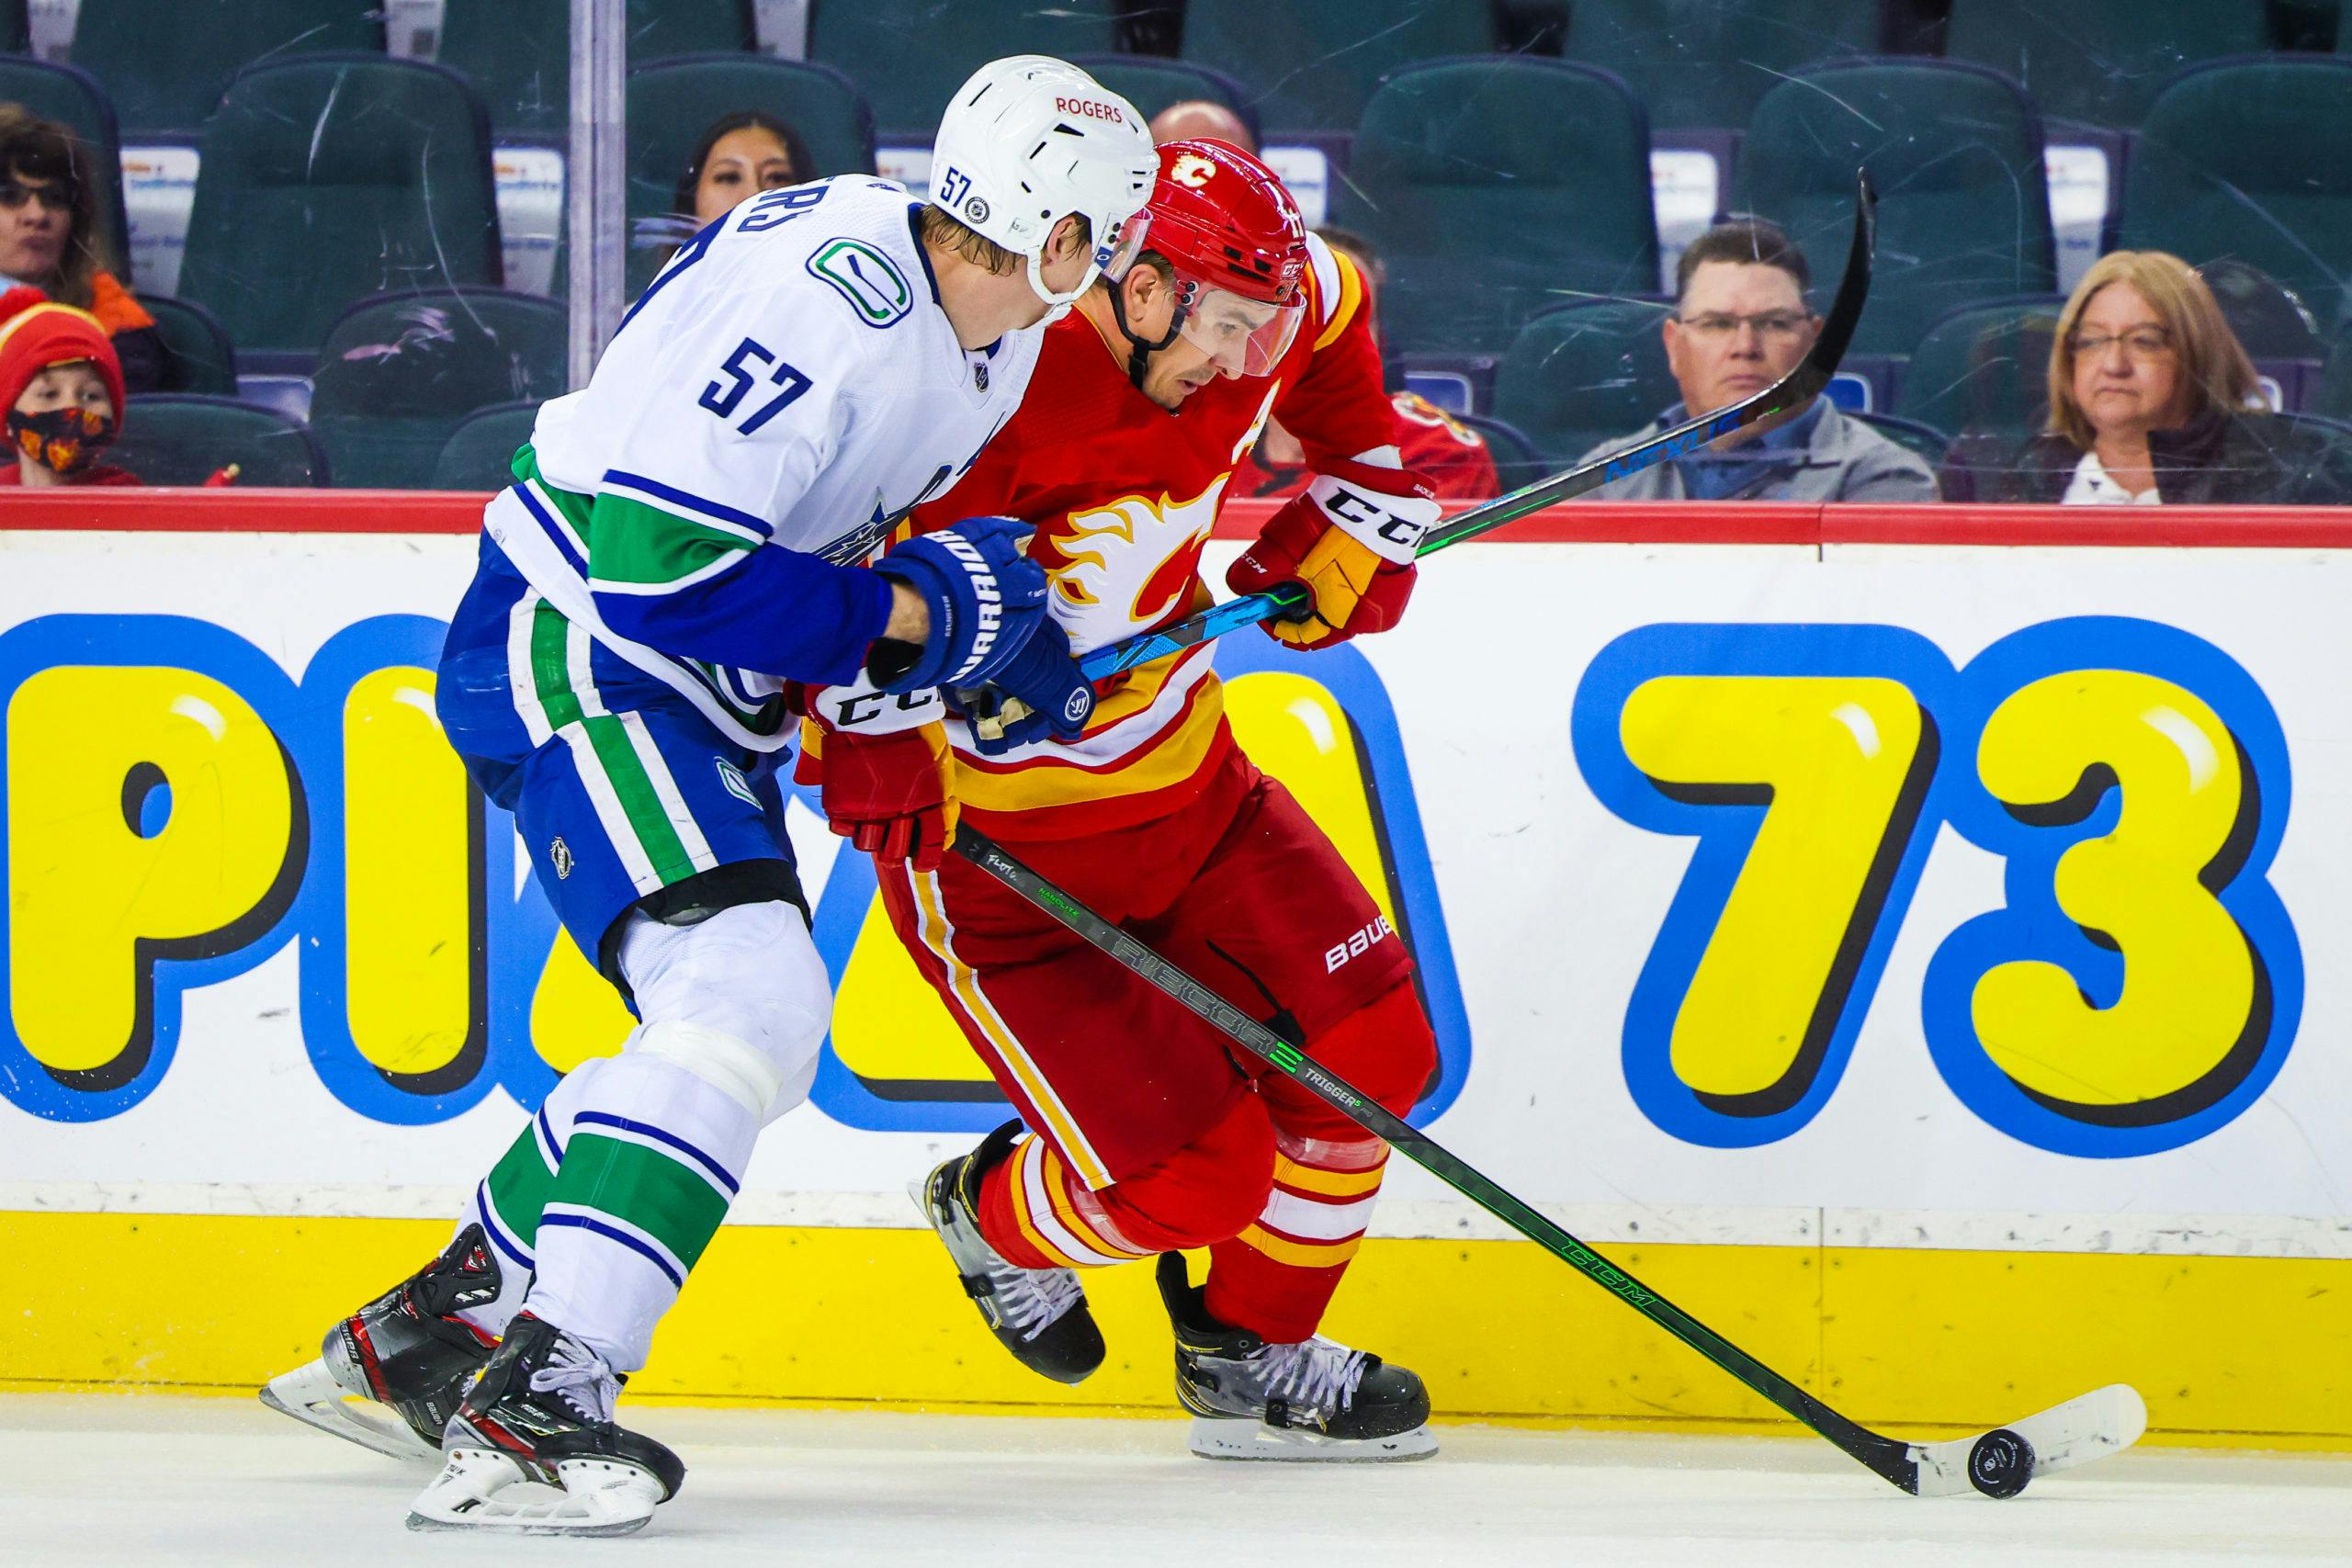 Tkachuk puts up three points, Calgary Flames hand Vancouver Canucks ugly  5-2 loss - Vancouver Is Awesome